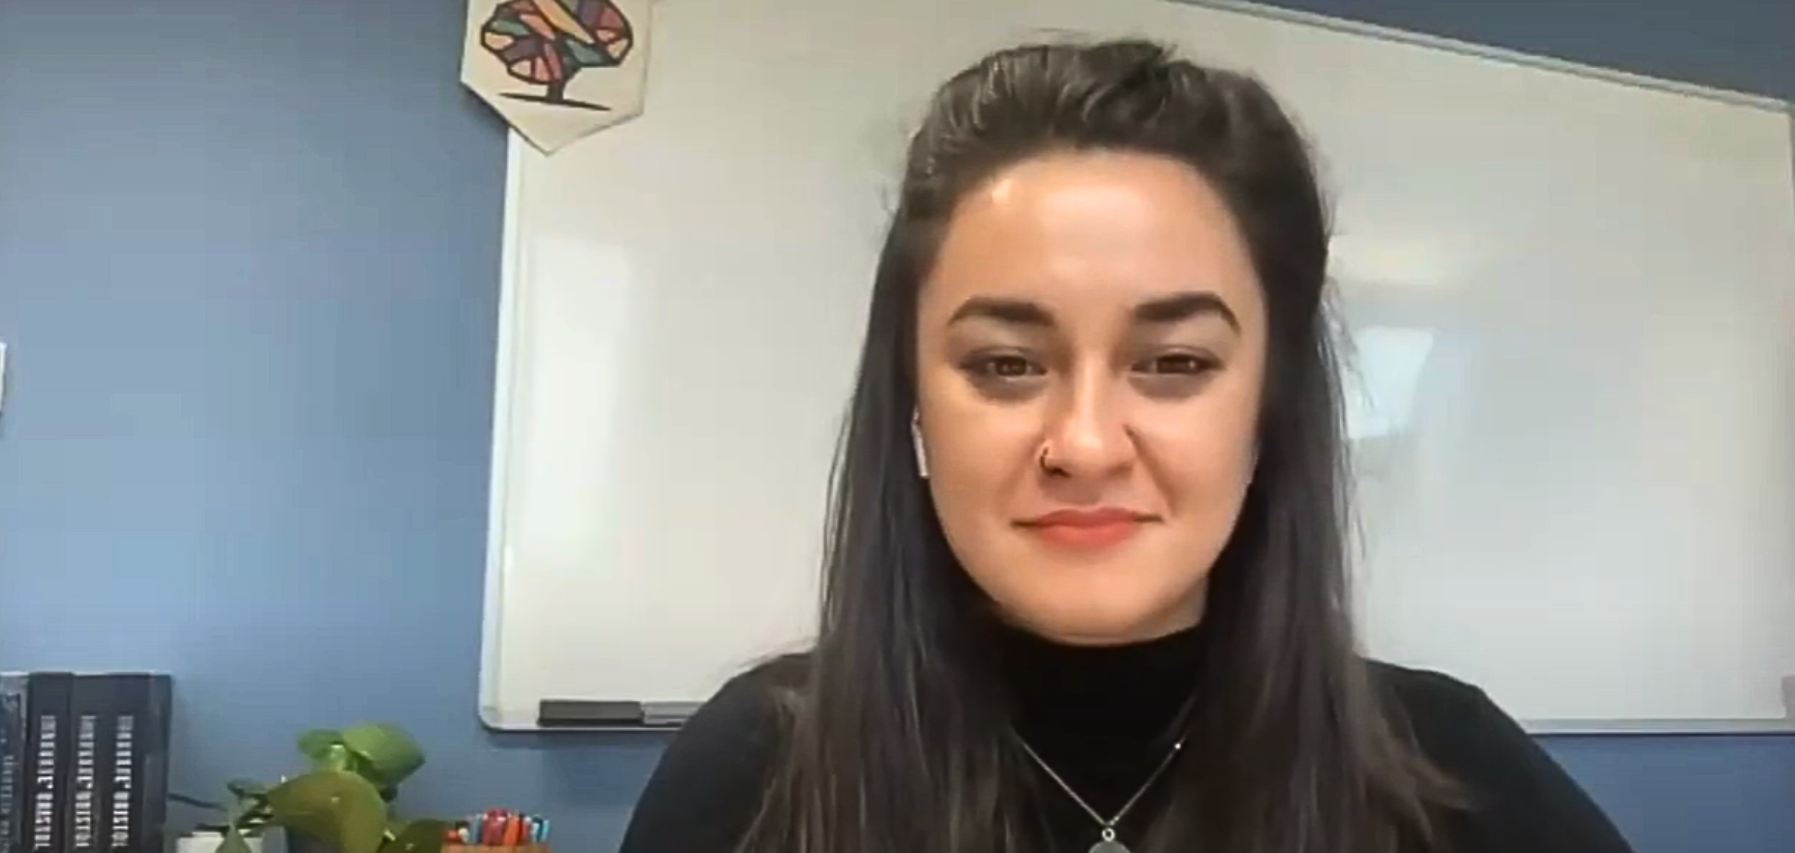 Screenshot of Devon Lowndes during the live webinar. Devon has long brown hair and is wearing a black top and seated in front of a whiteboard.